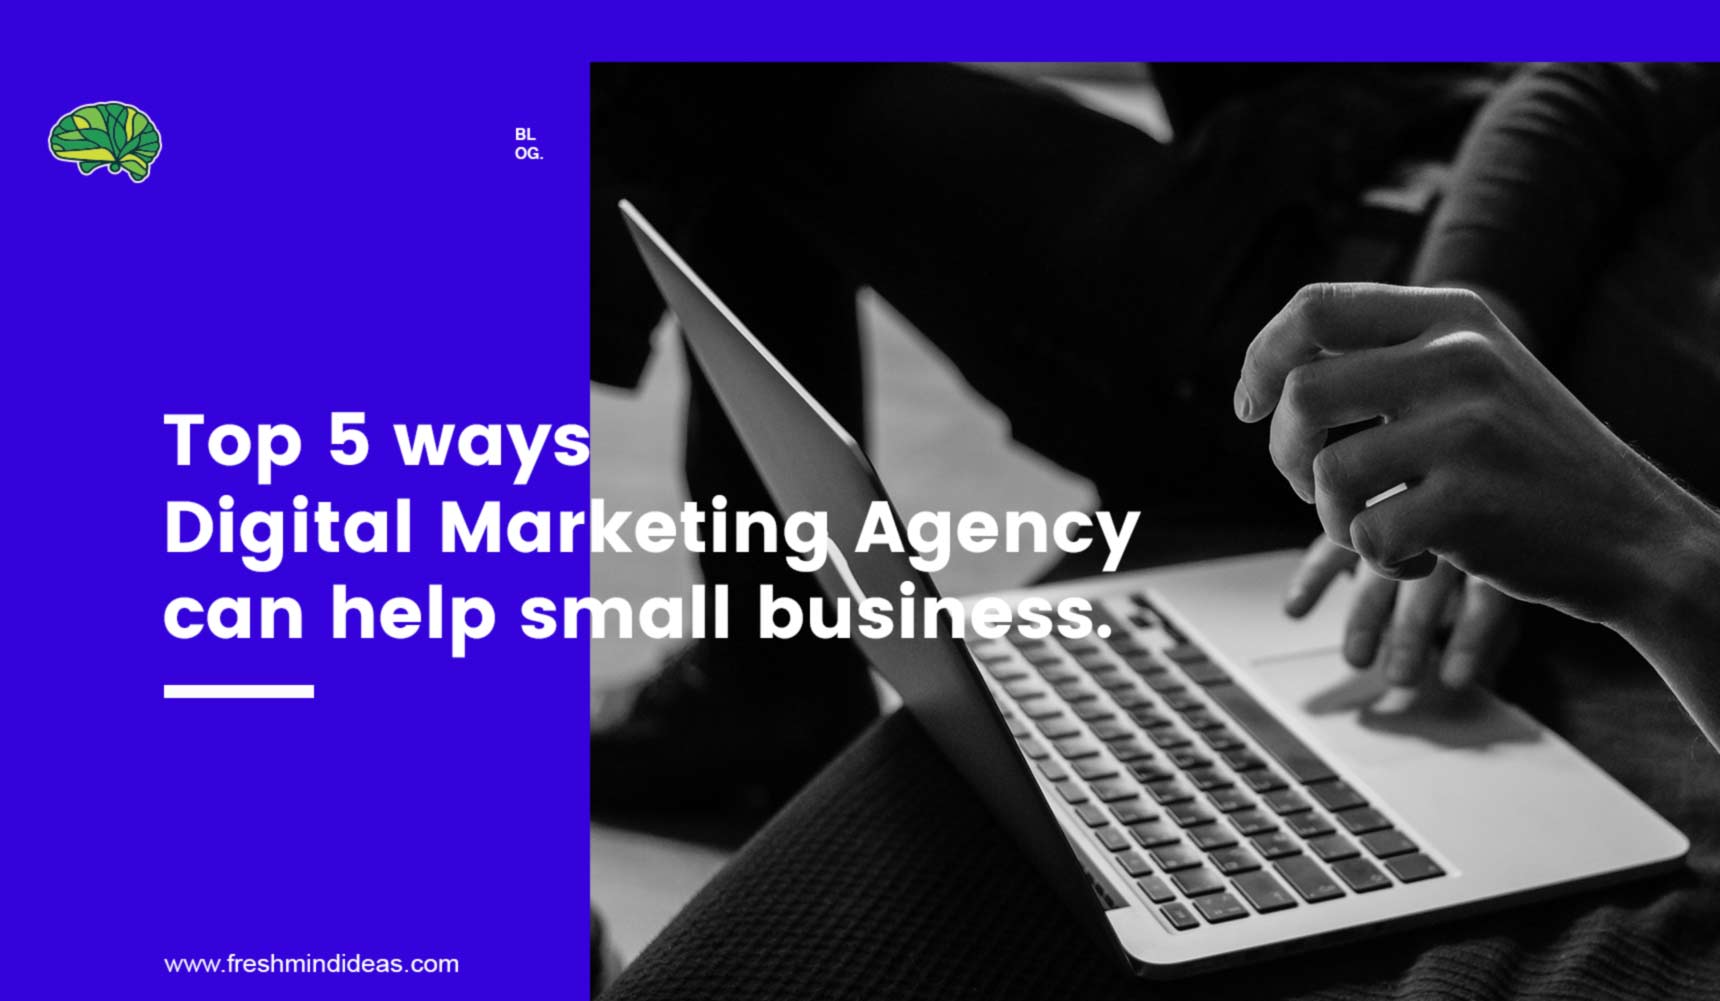 Top 5 ways a digital marketing agency can help small businesses in India